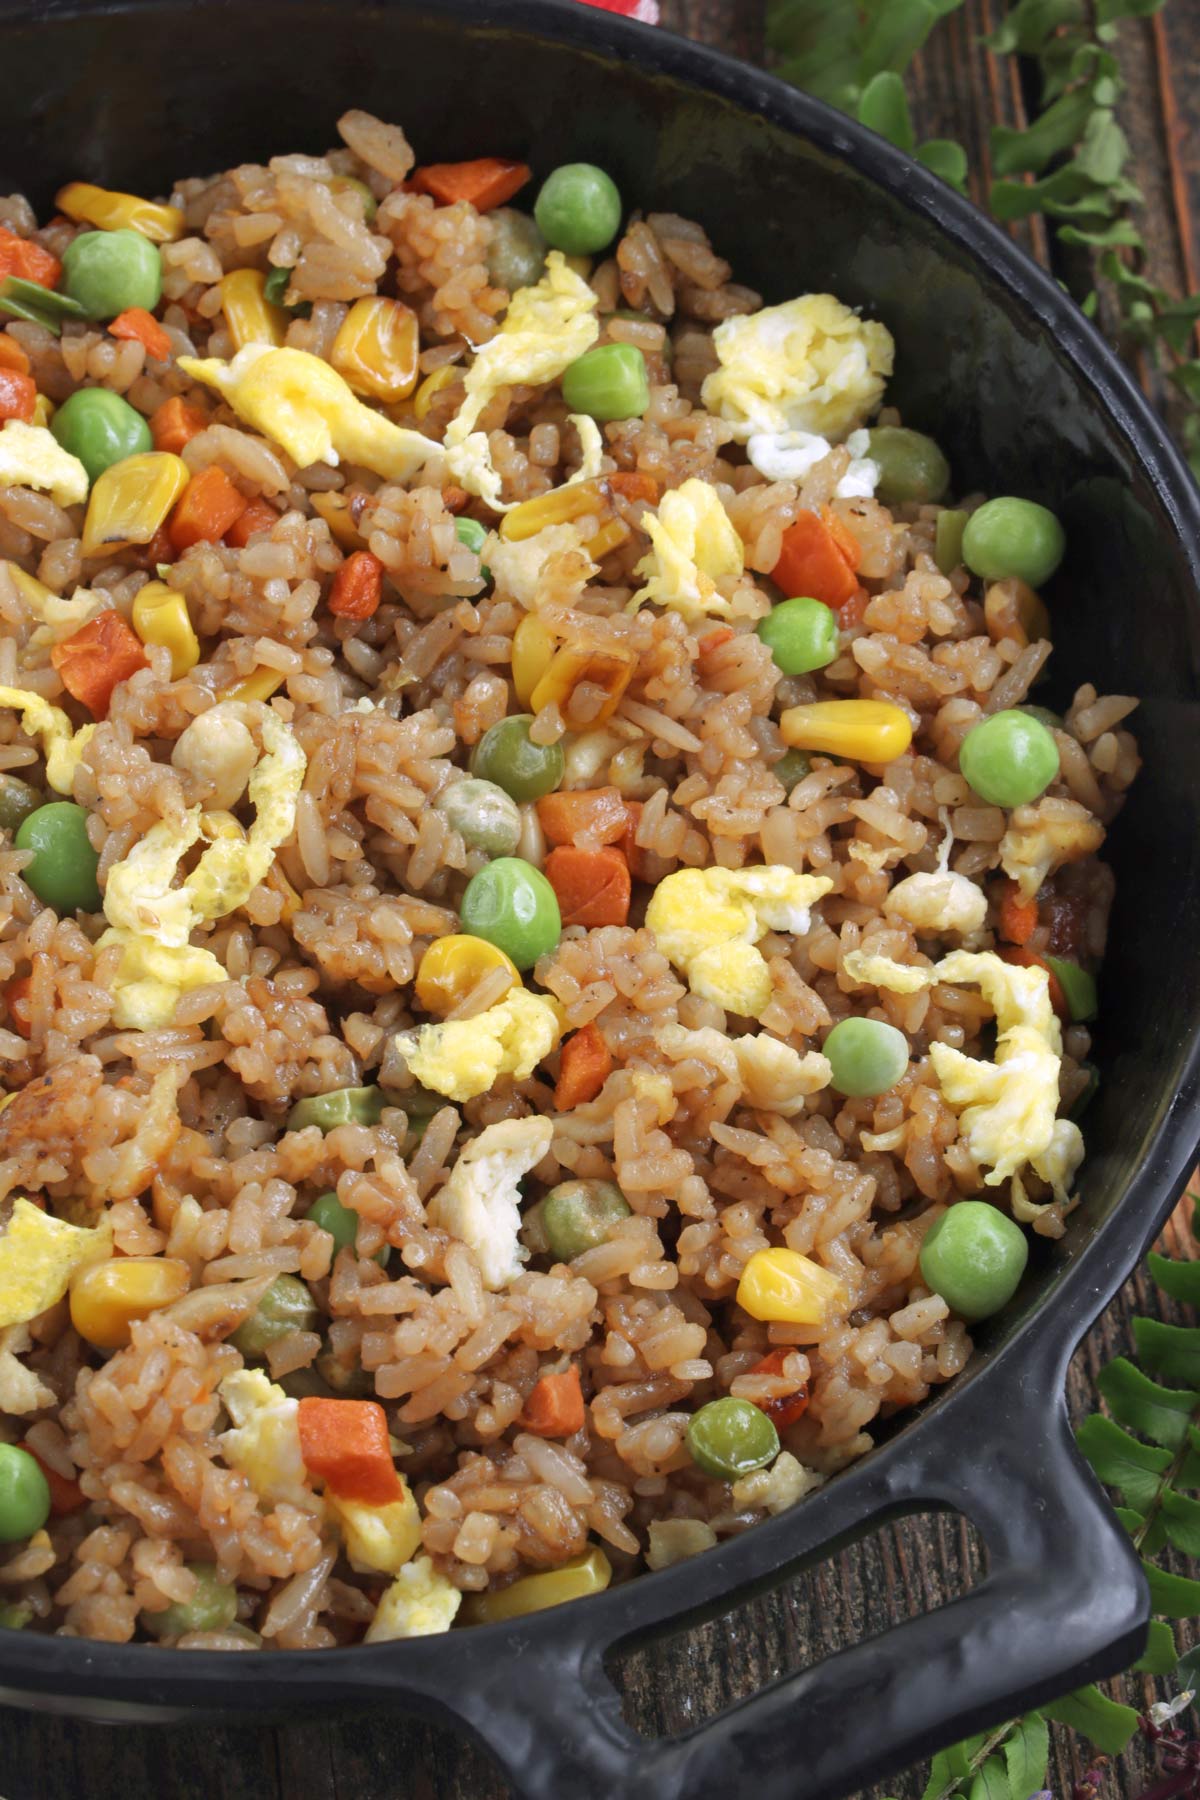 Fried rice studded with vegetables and egg.